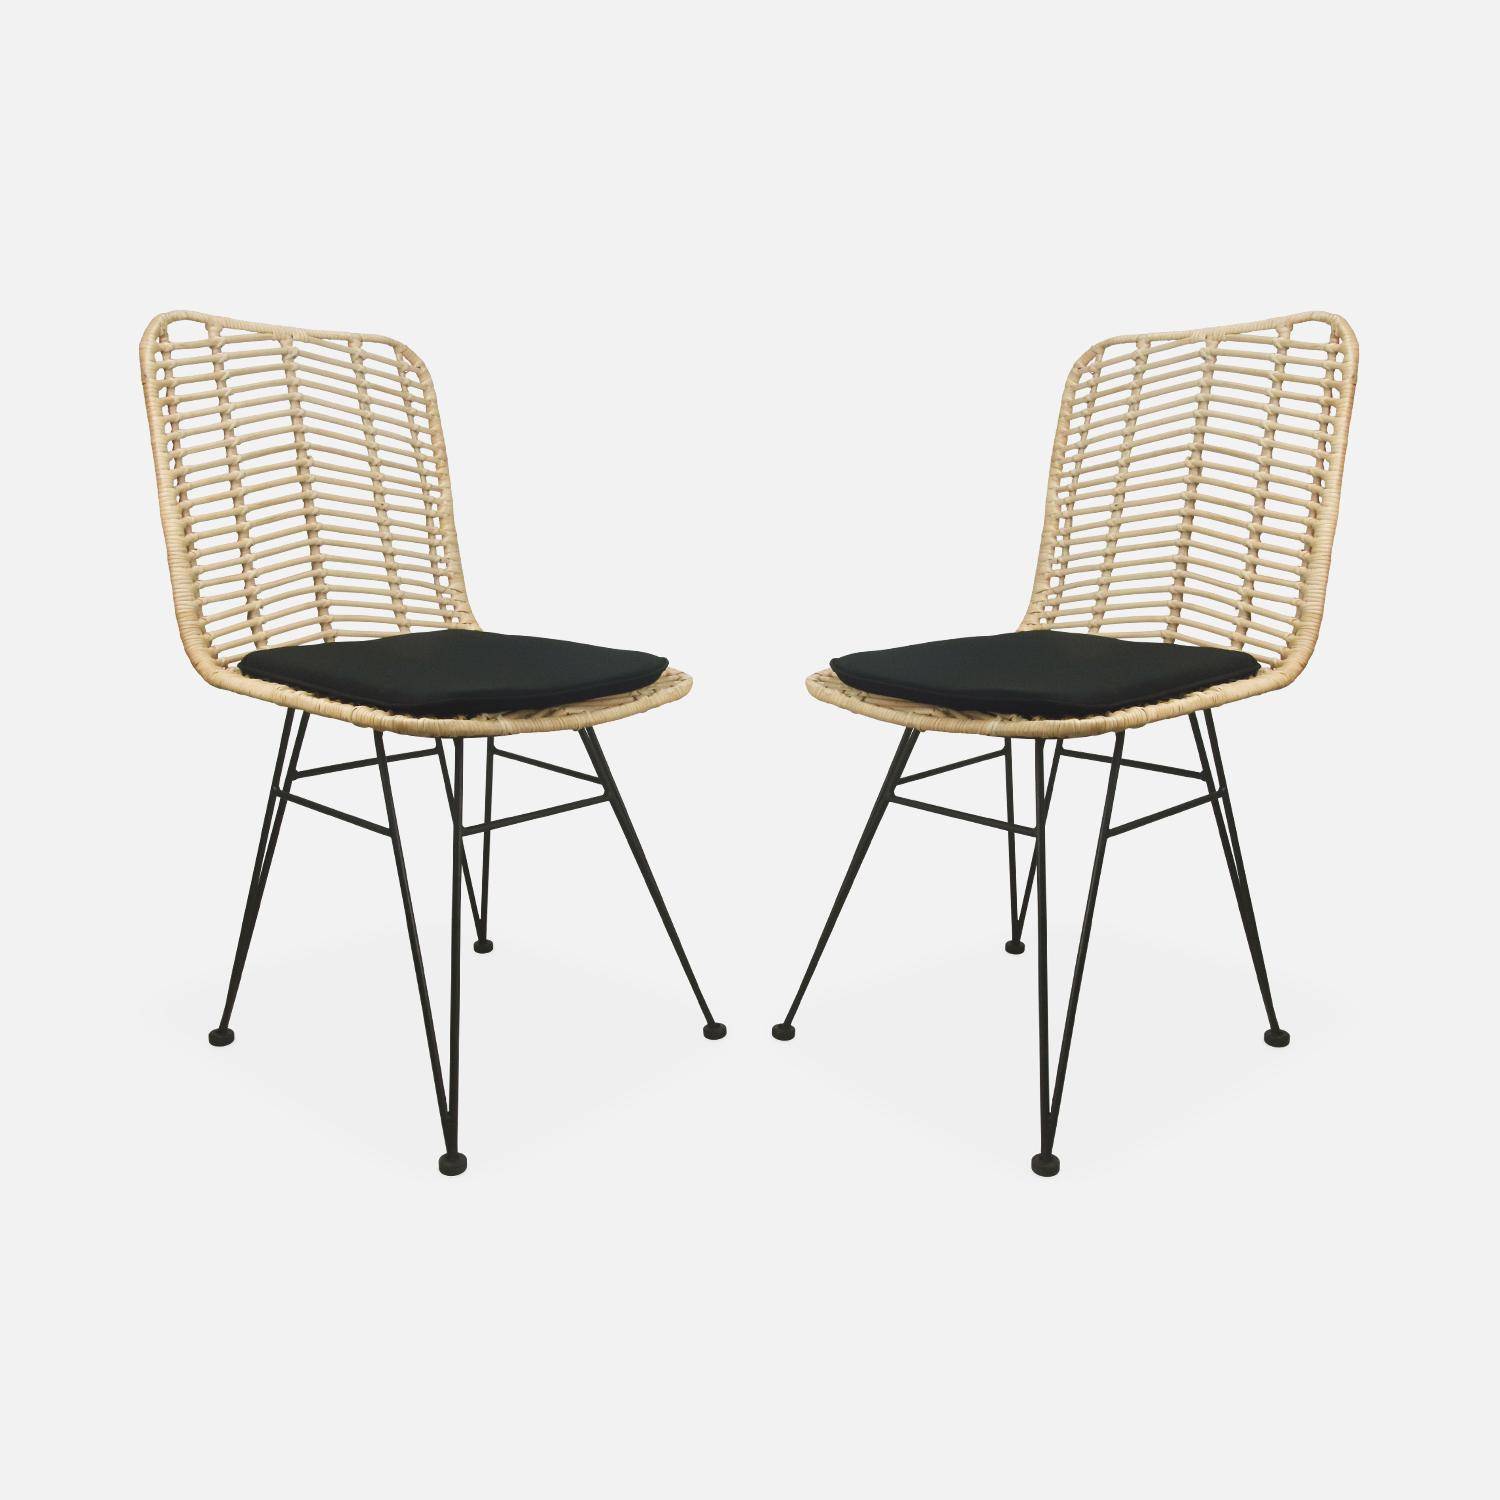 Pair of high-backed rattan dining chairs with metal legs and cushions - Cahya - Natural rattan, Black cushions,sweeek,Photo4